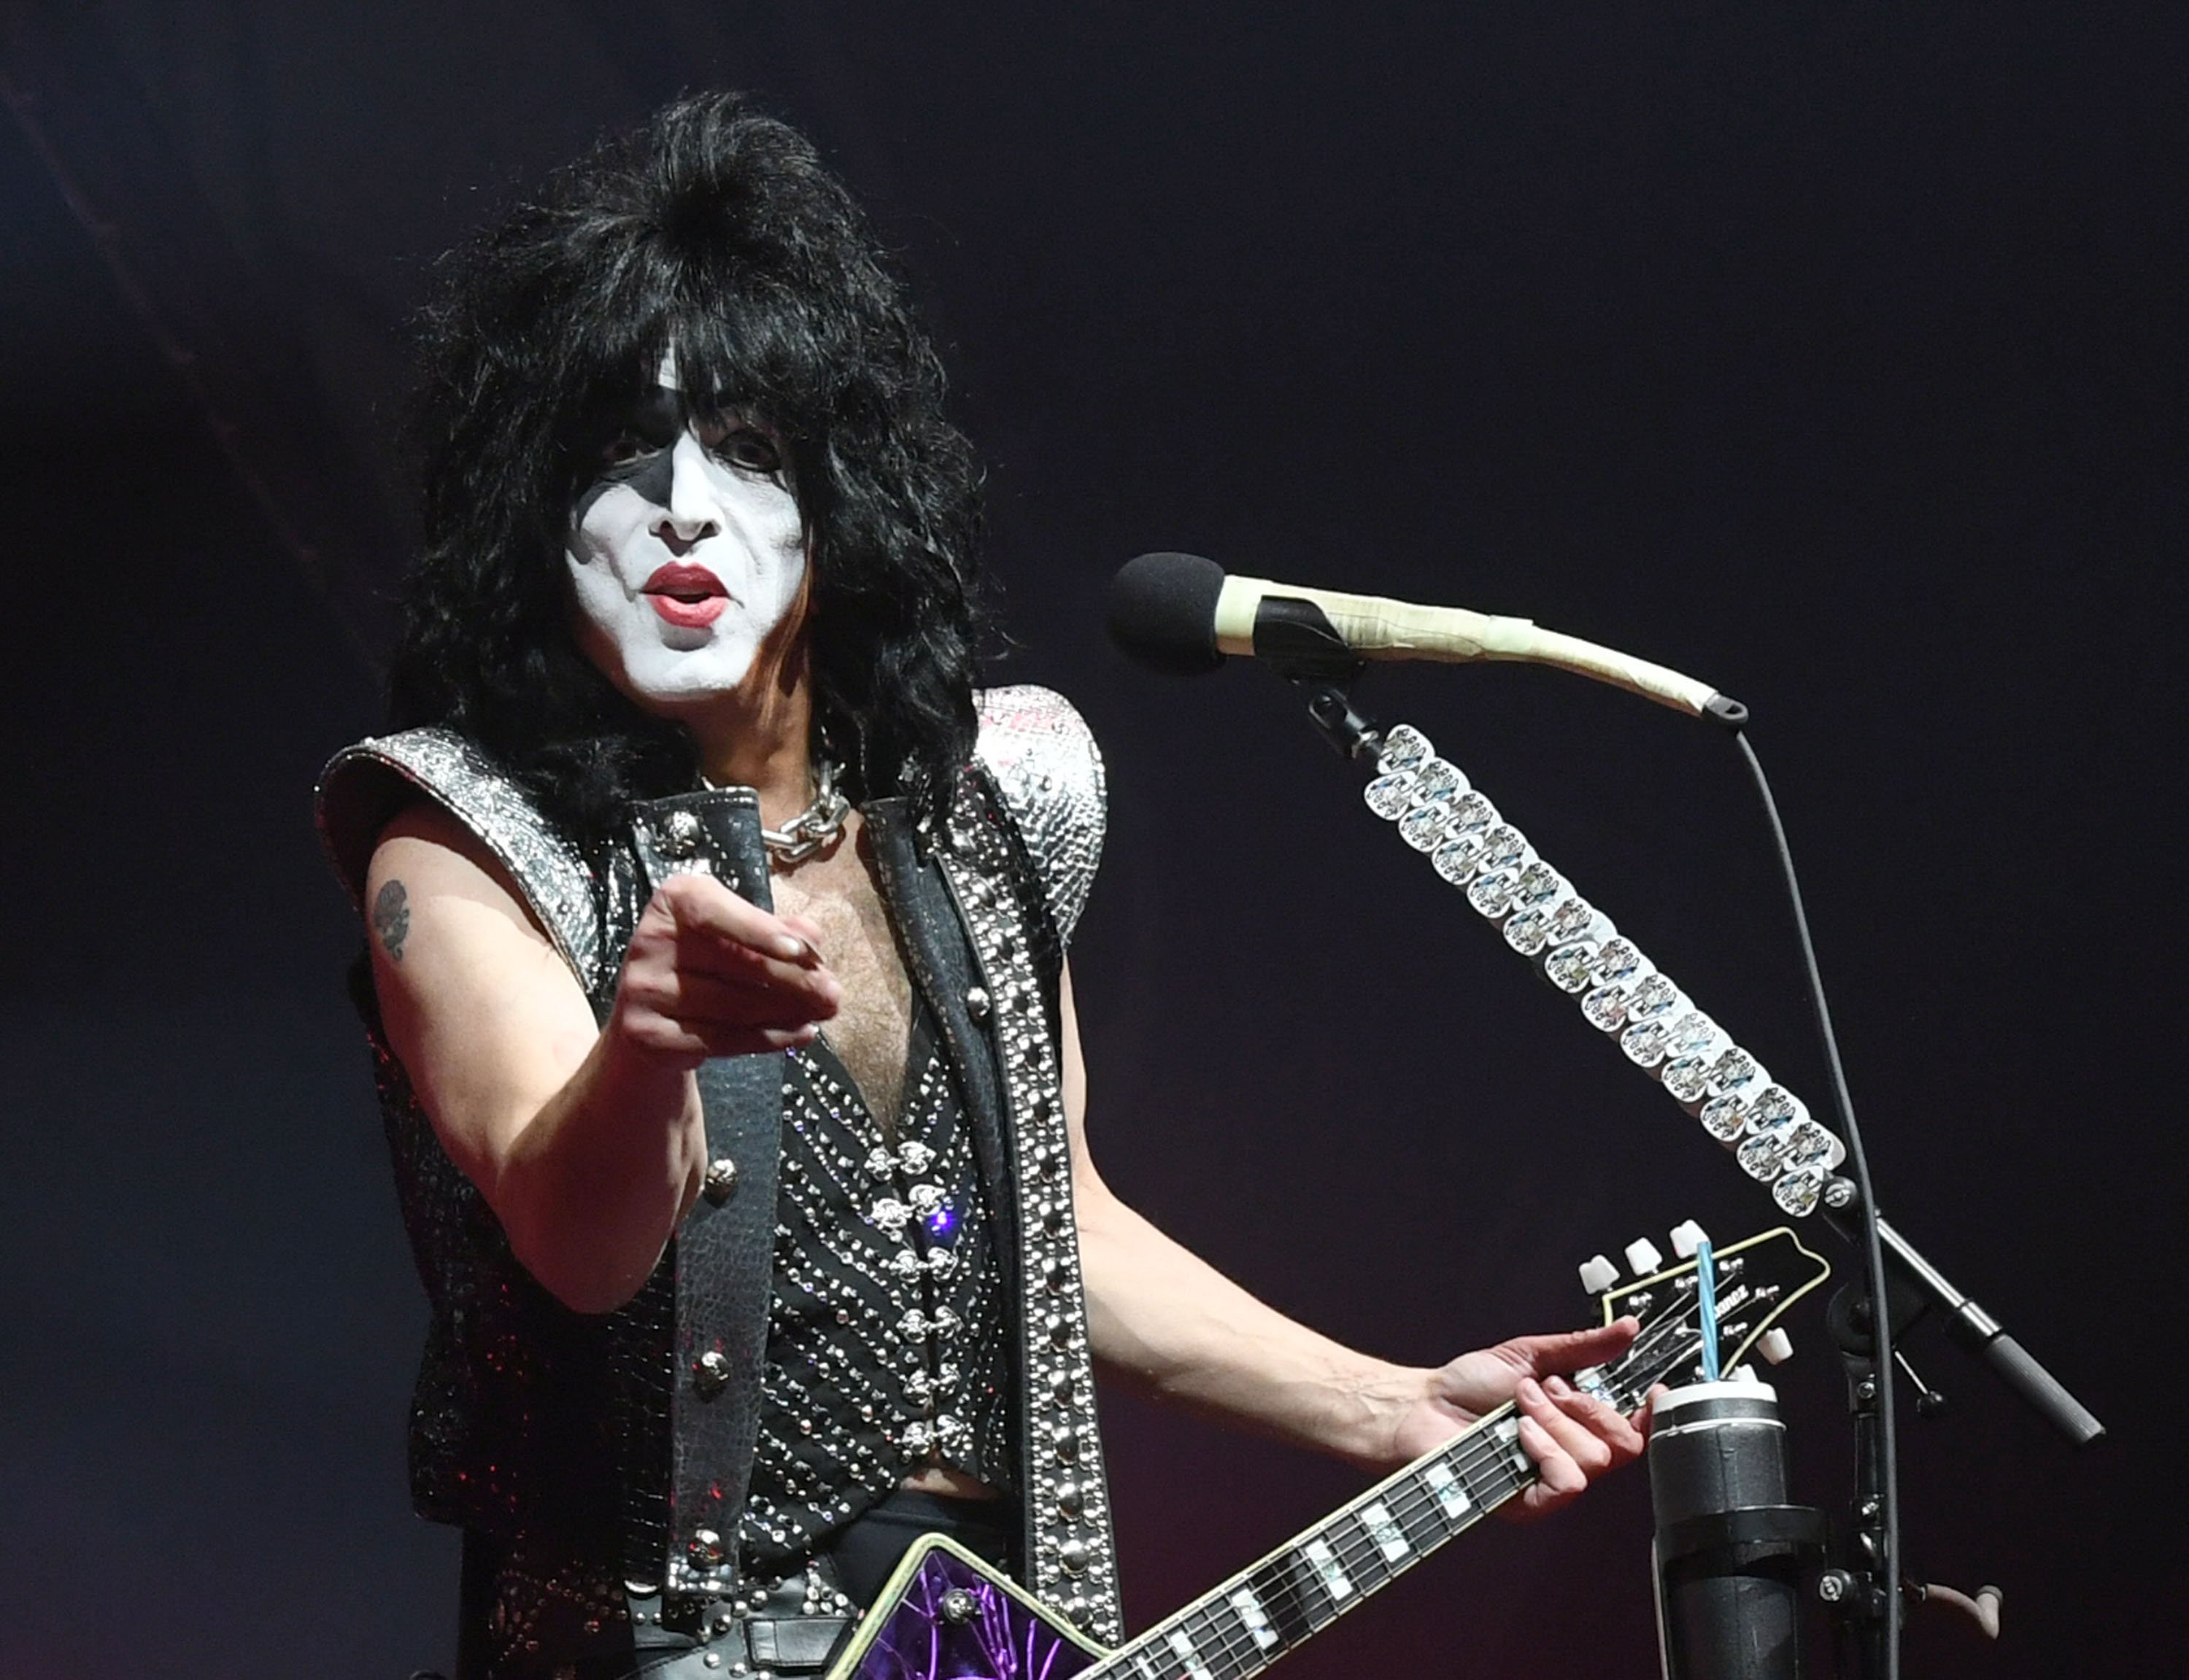 Paul Stanley with a guitar